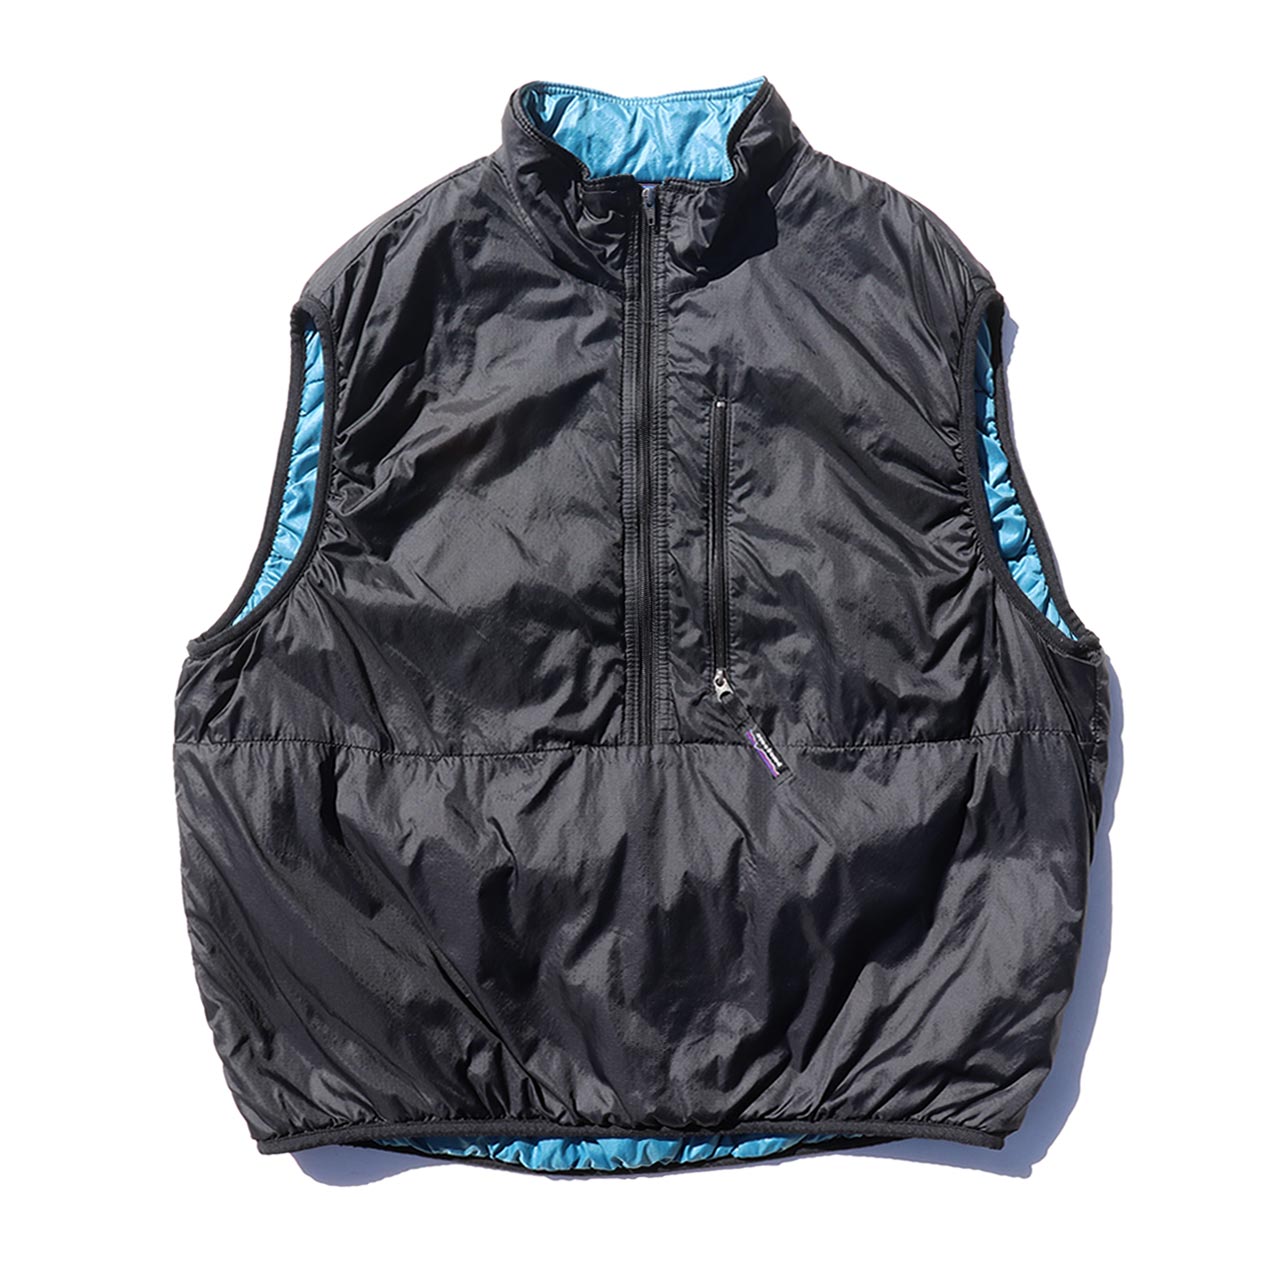 Patagonia puffball vest 90s パフボール ナイロン